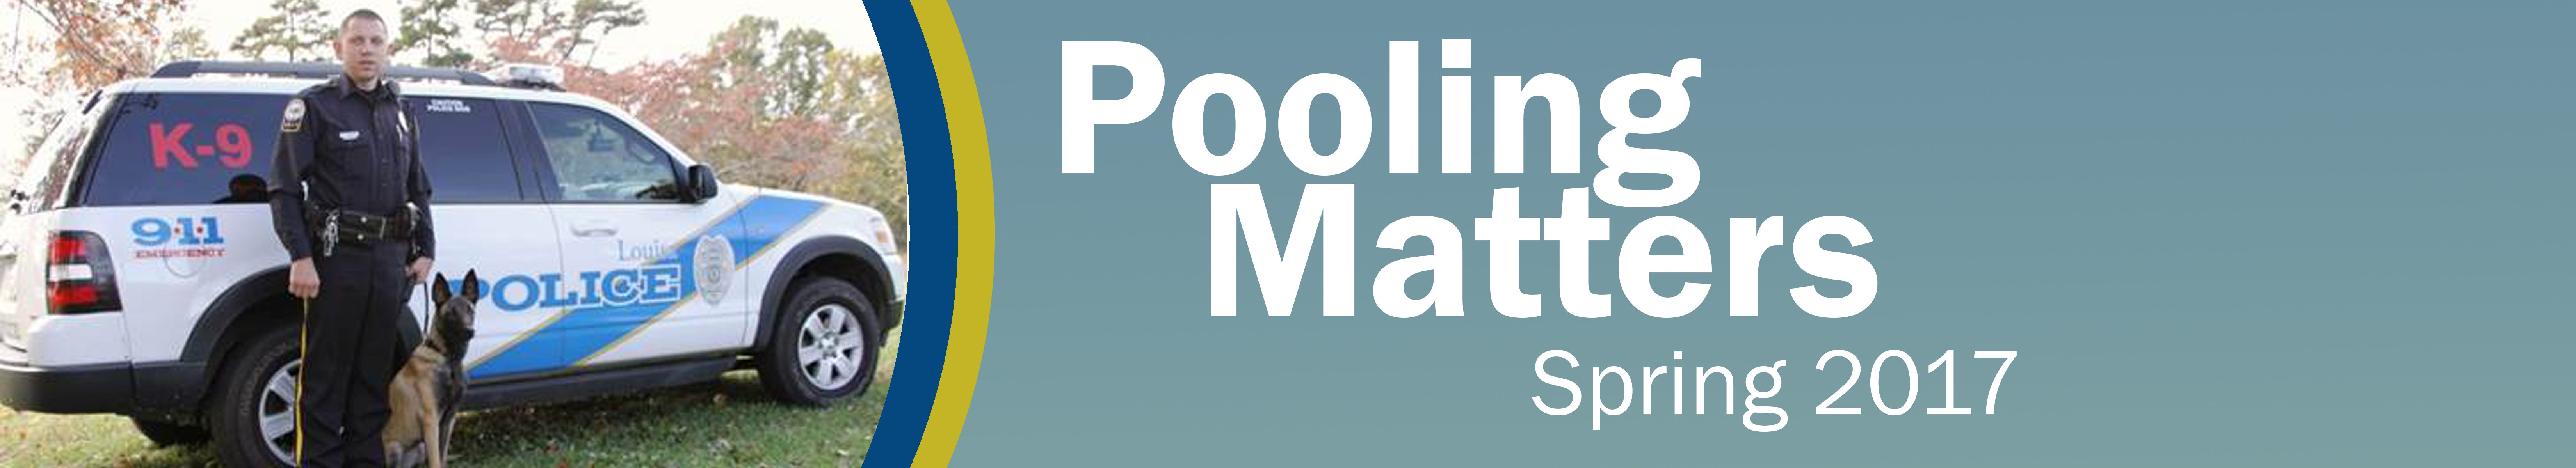 Pooling Matters: 2017 Spring Issue